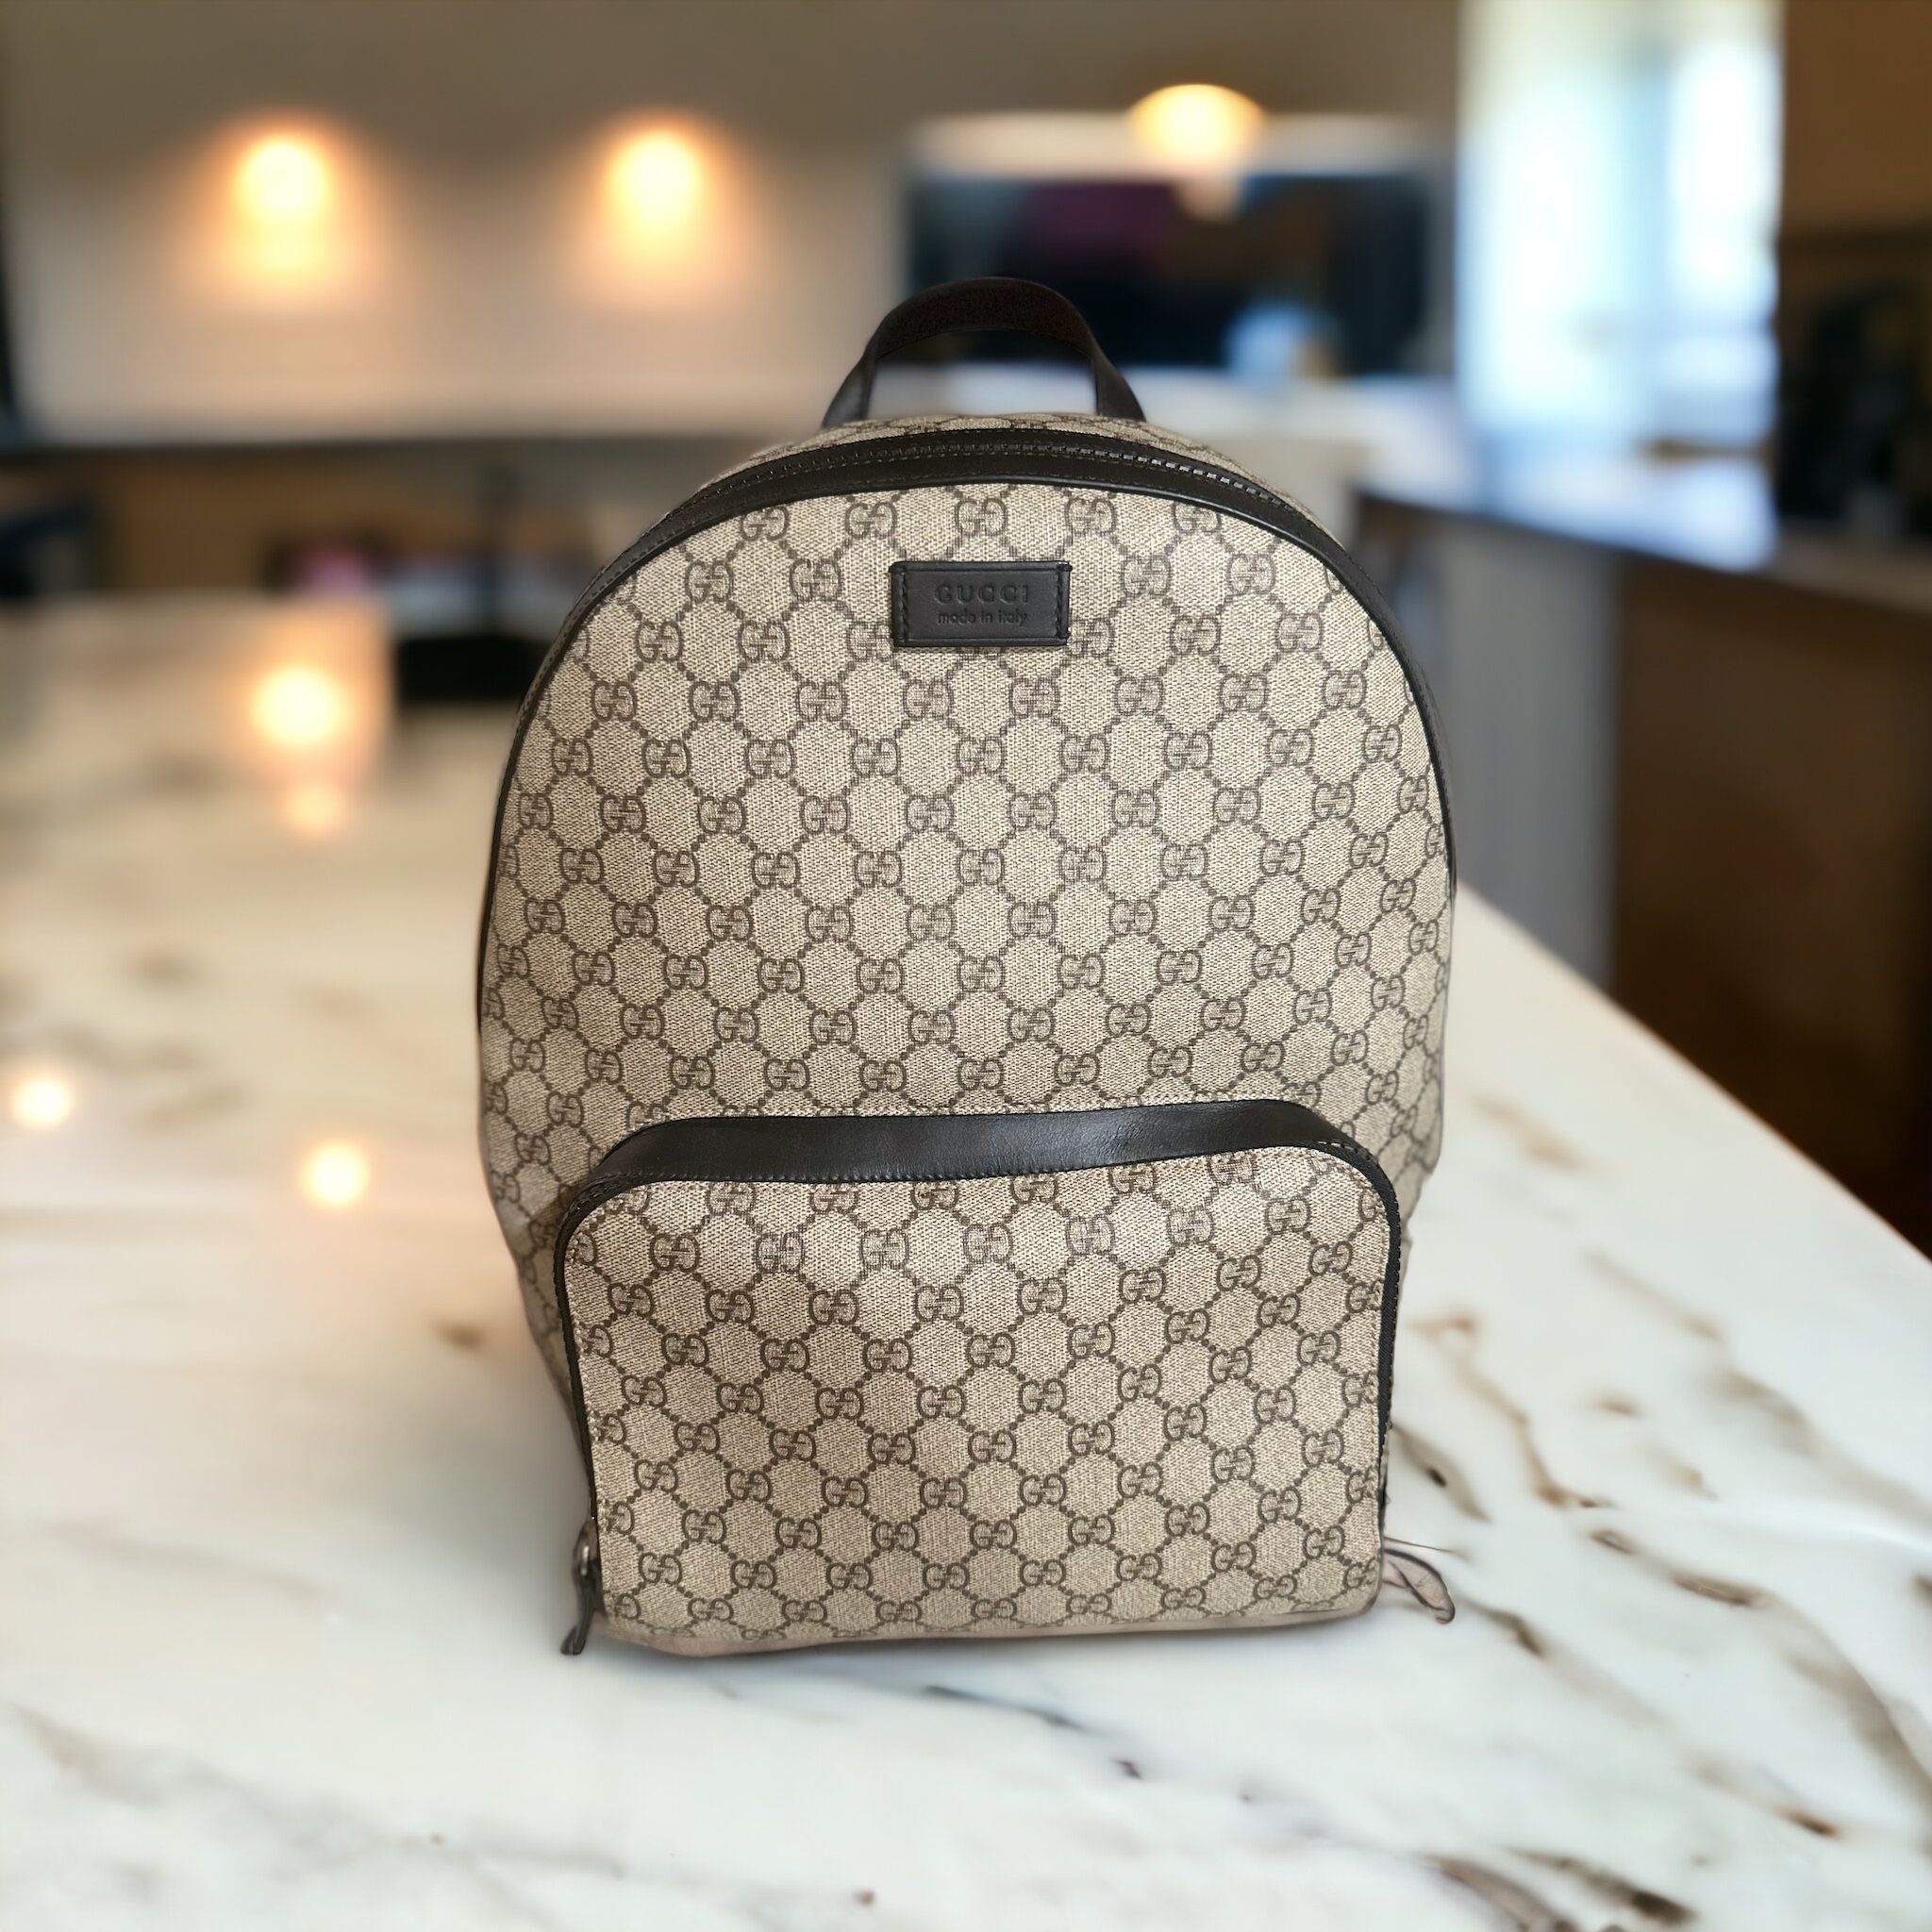 Gucci Backpack - GG Supreme with Front Zipper Pocket - Unisex